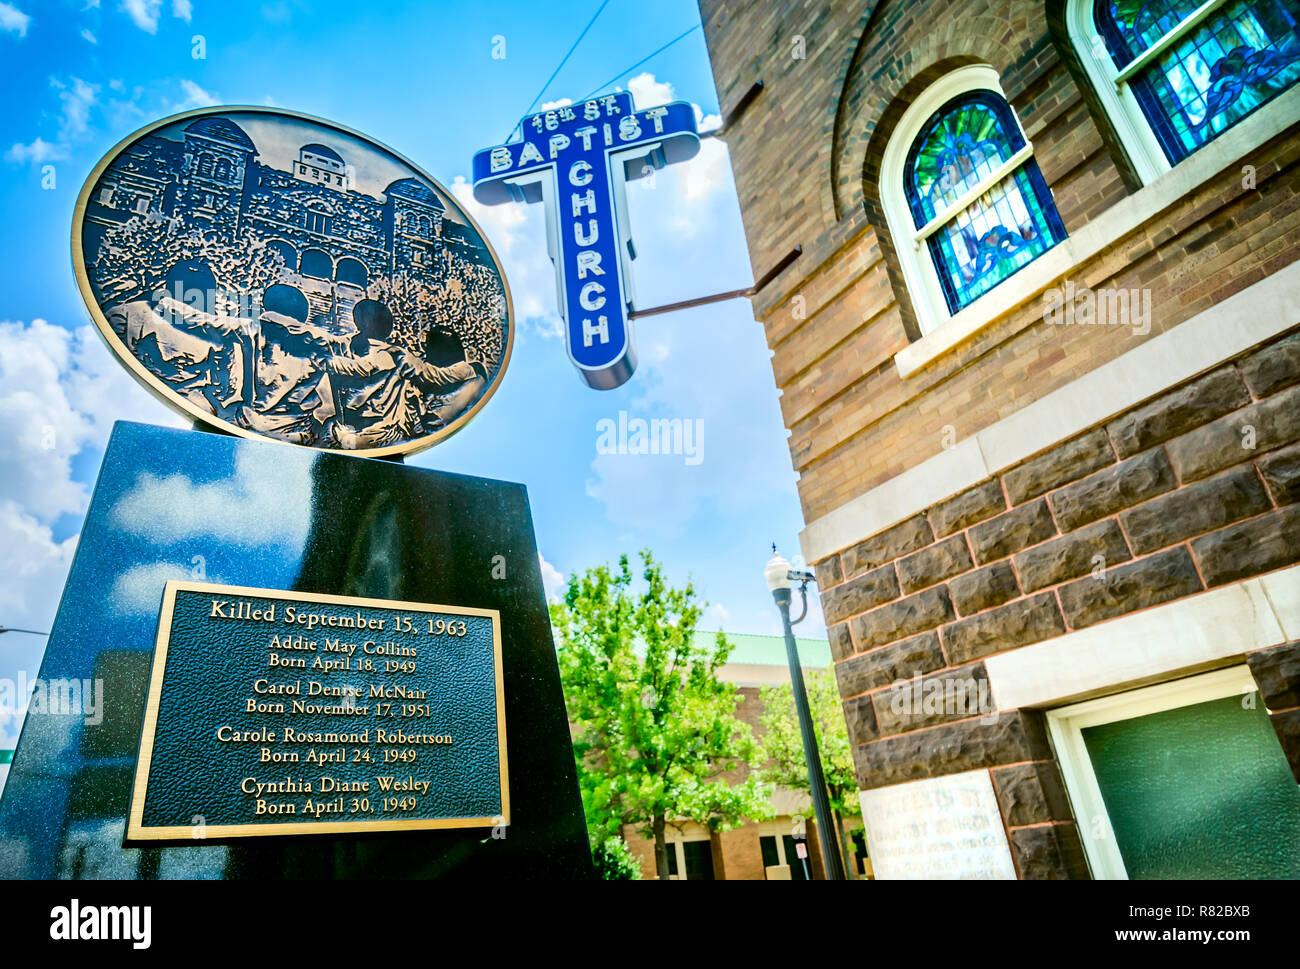 A monument commemorates the 1963 bombing of 16th St. Baptist Church and the deaths of four children, July 12, 2015, in Birmingham, Alabama. Stock Photo